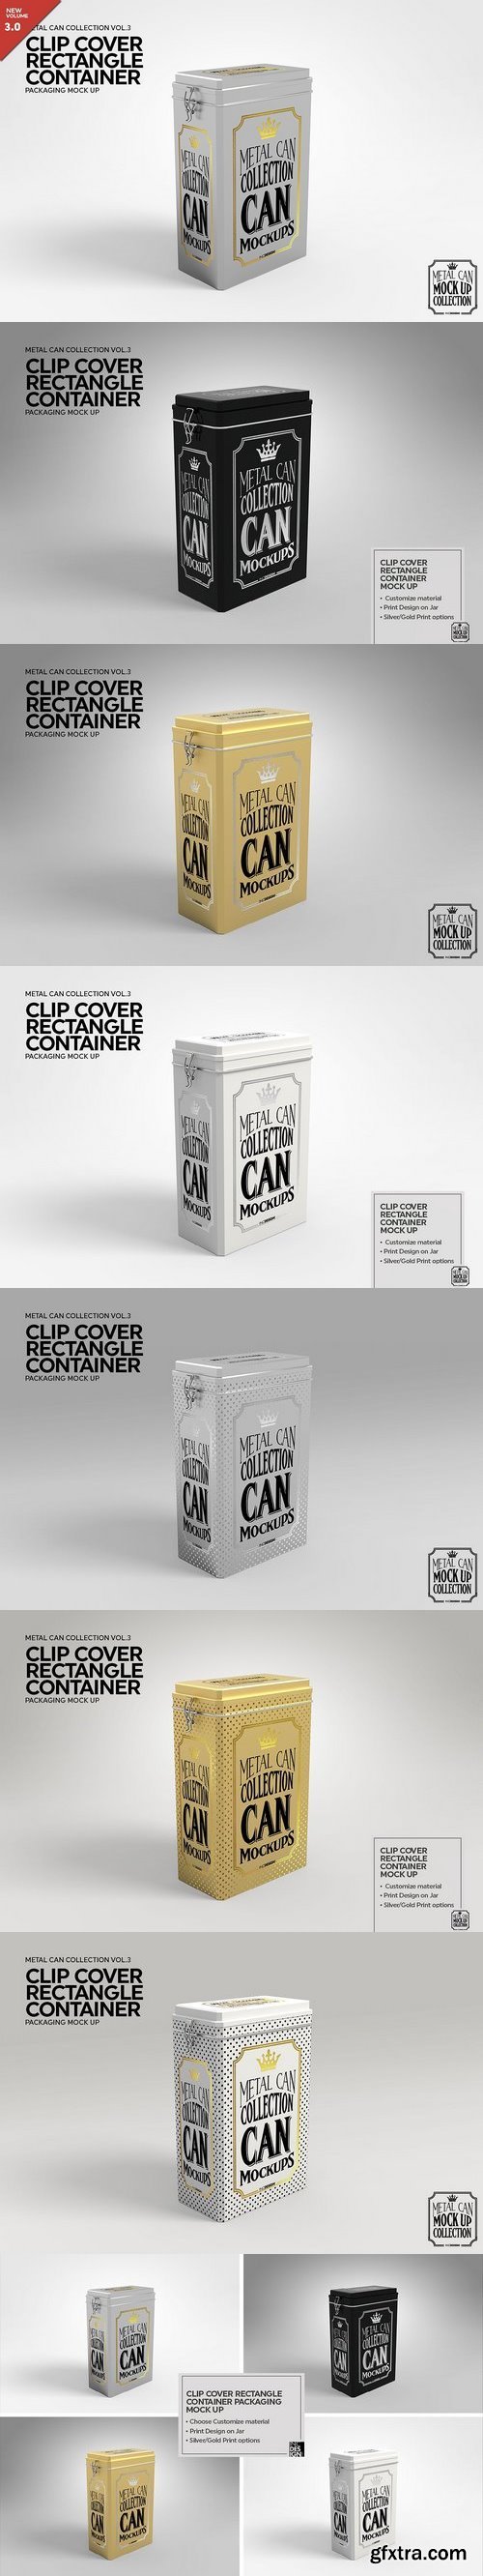 CM - ClipCover Rectangle Container MockUp 1929519